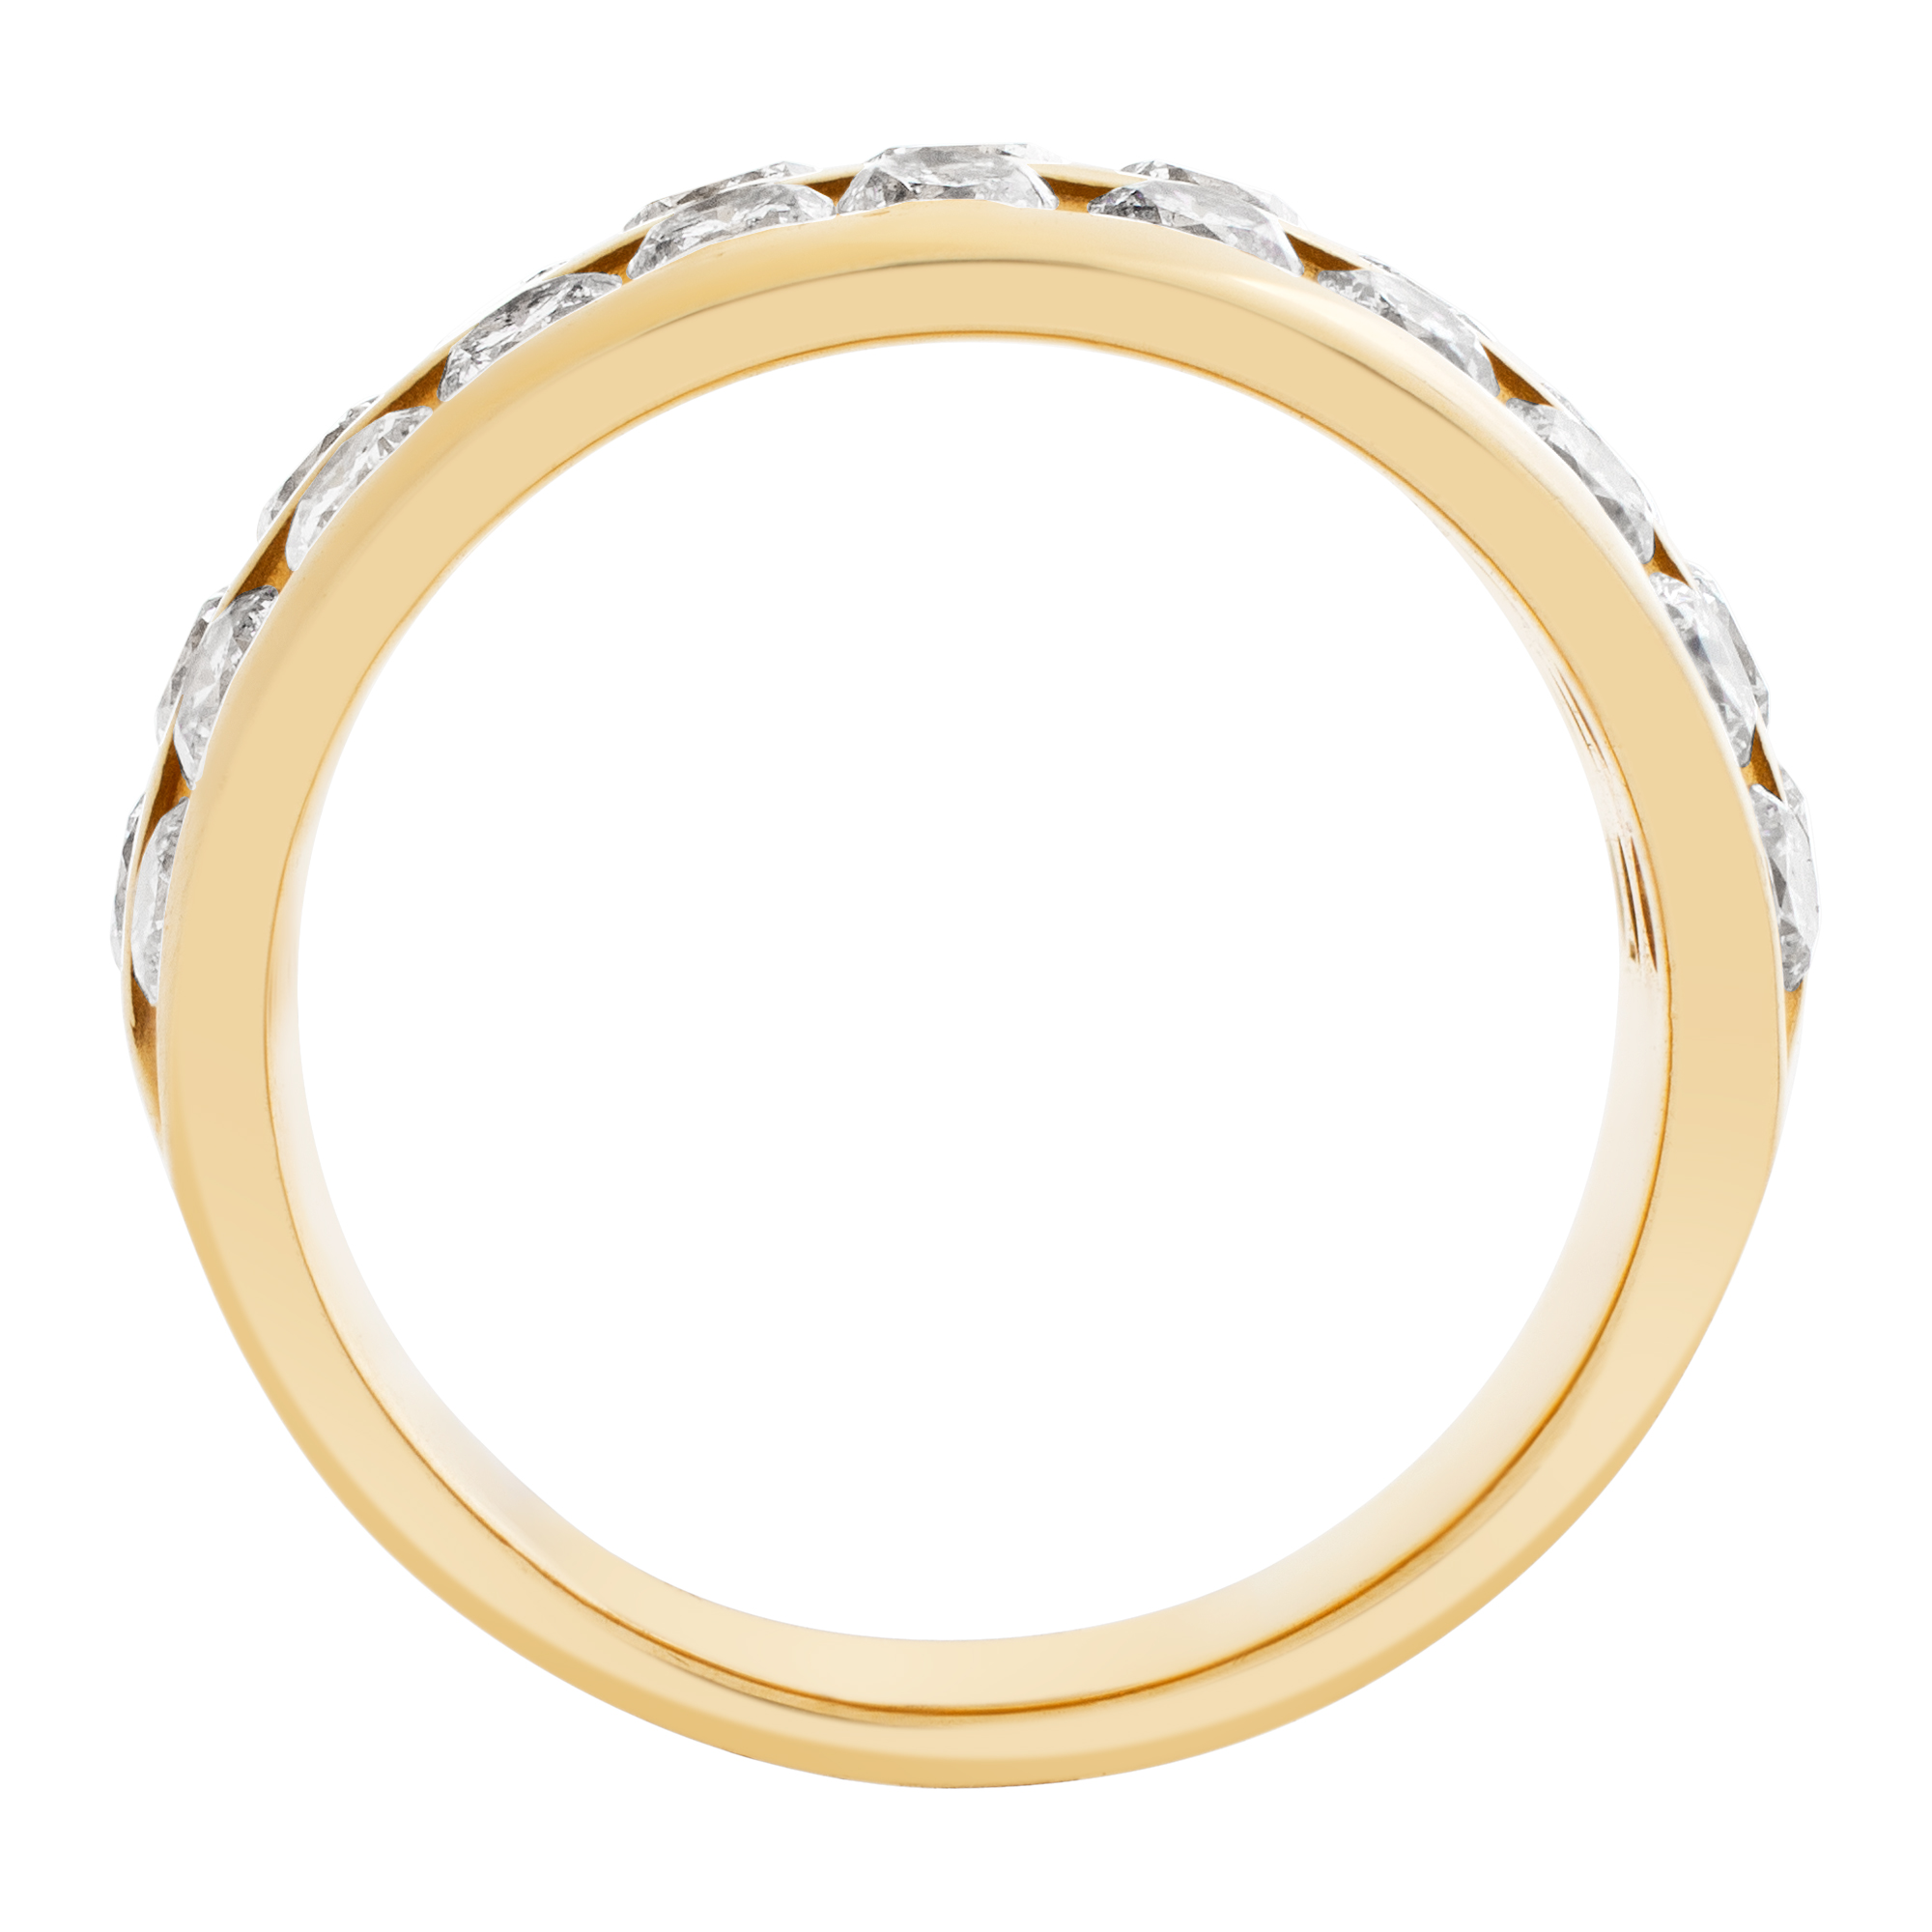 Wide band in 14k yellow gold. 1.50 carats in 3 rows of channel set diamonds image 4